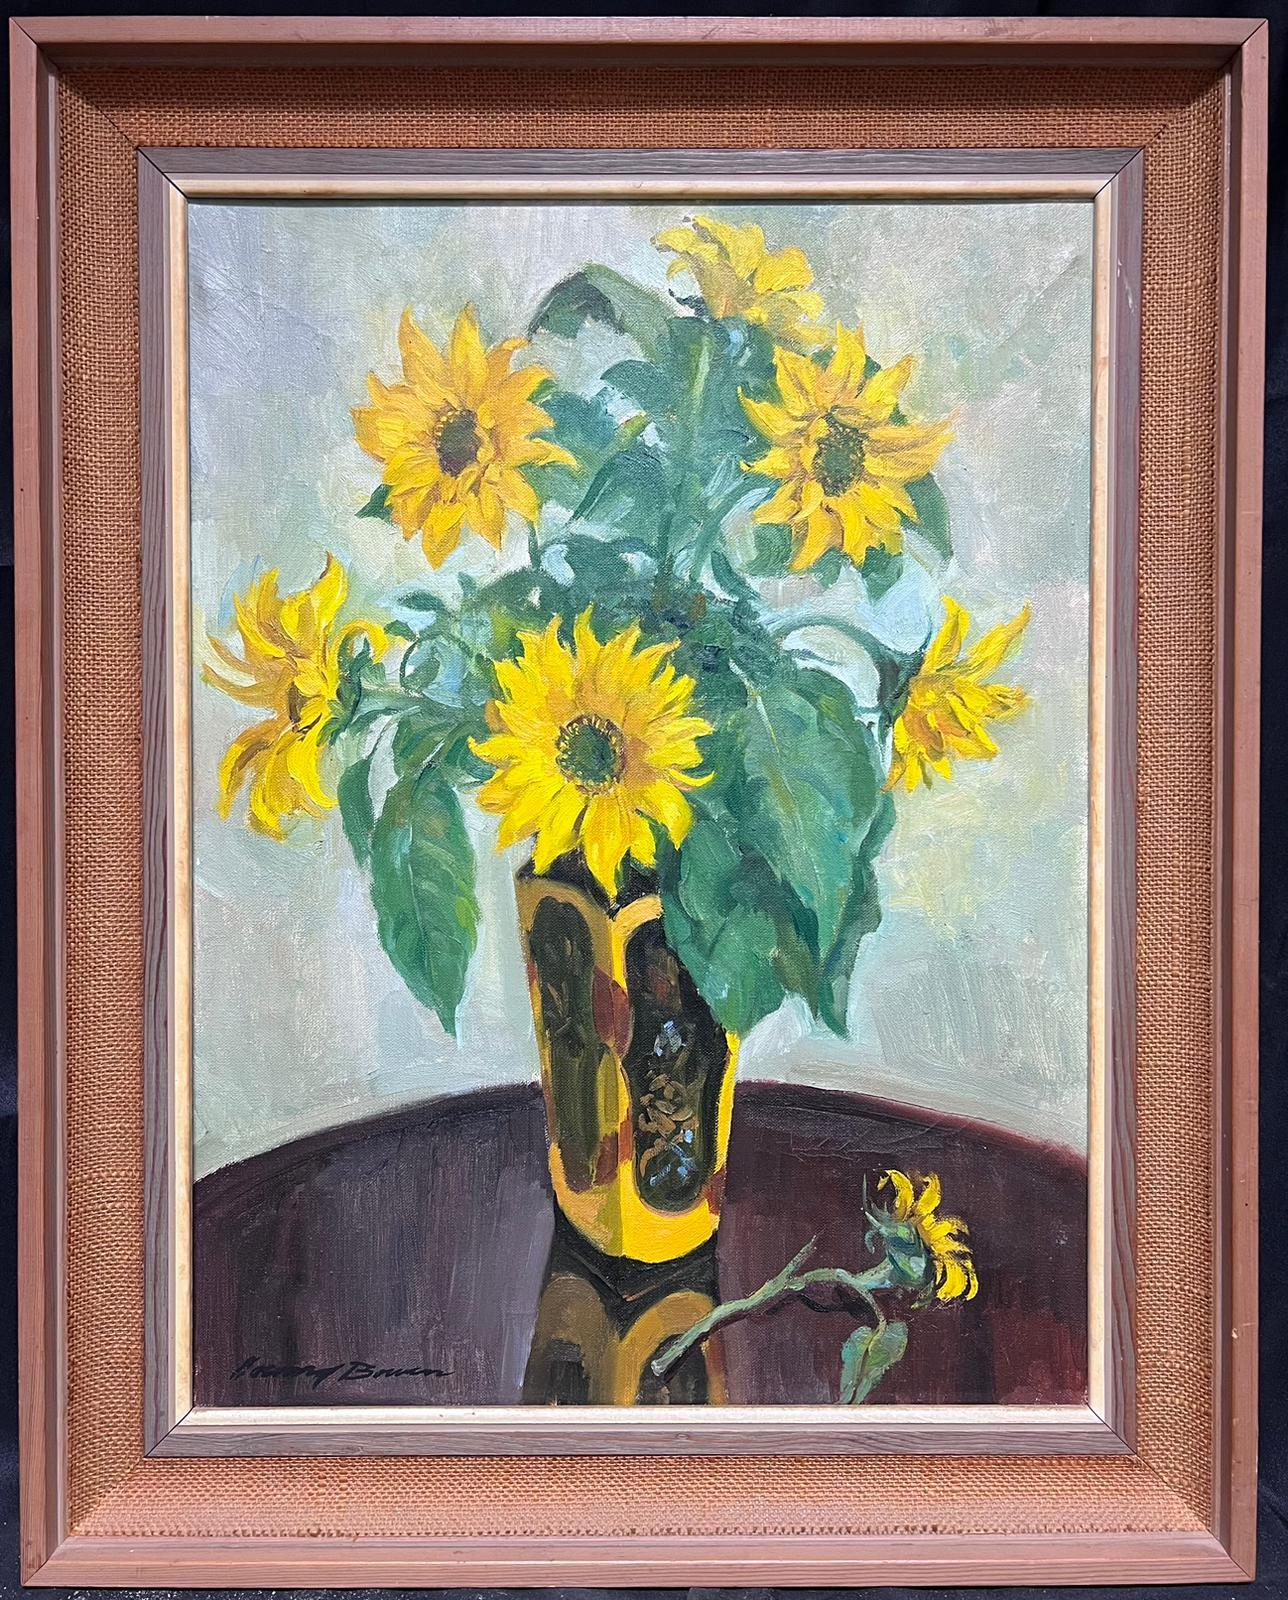 Sunflowers in Vase 1950's English Impressionist Signed Oil Painting on Canvas